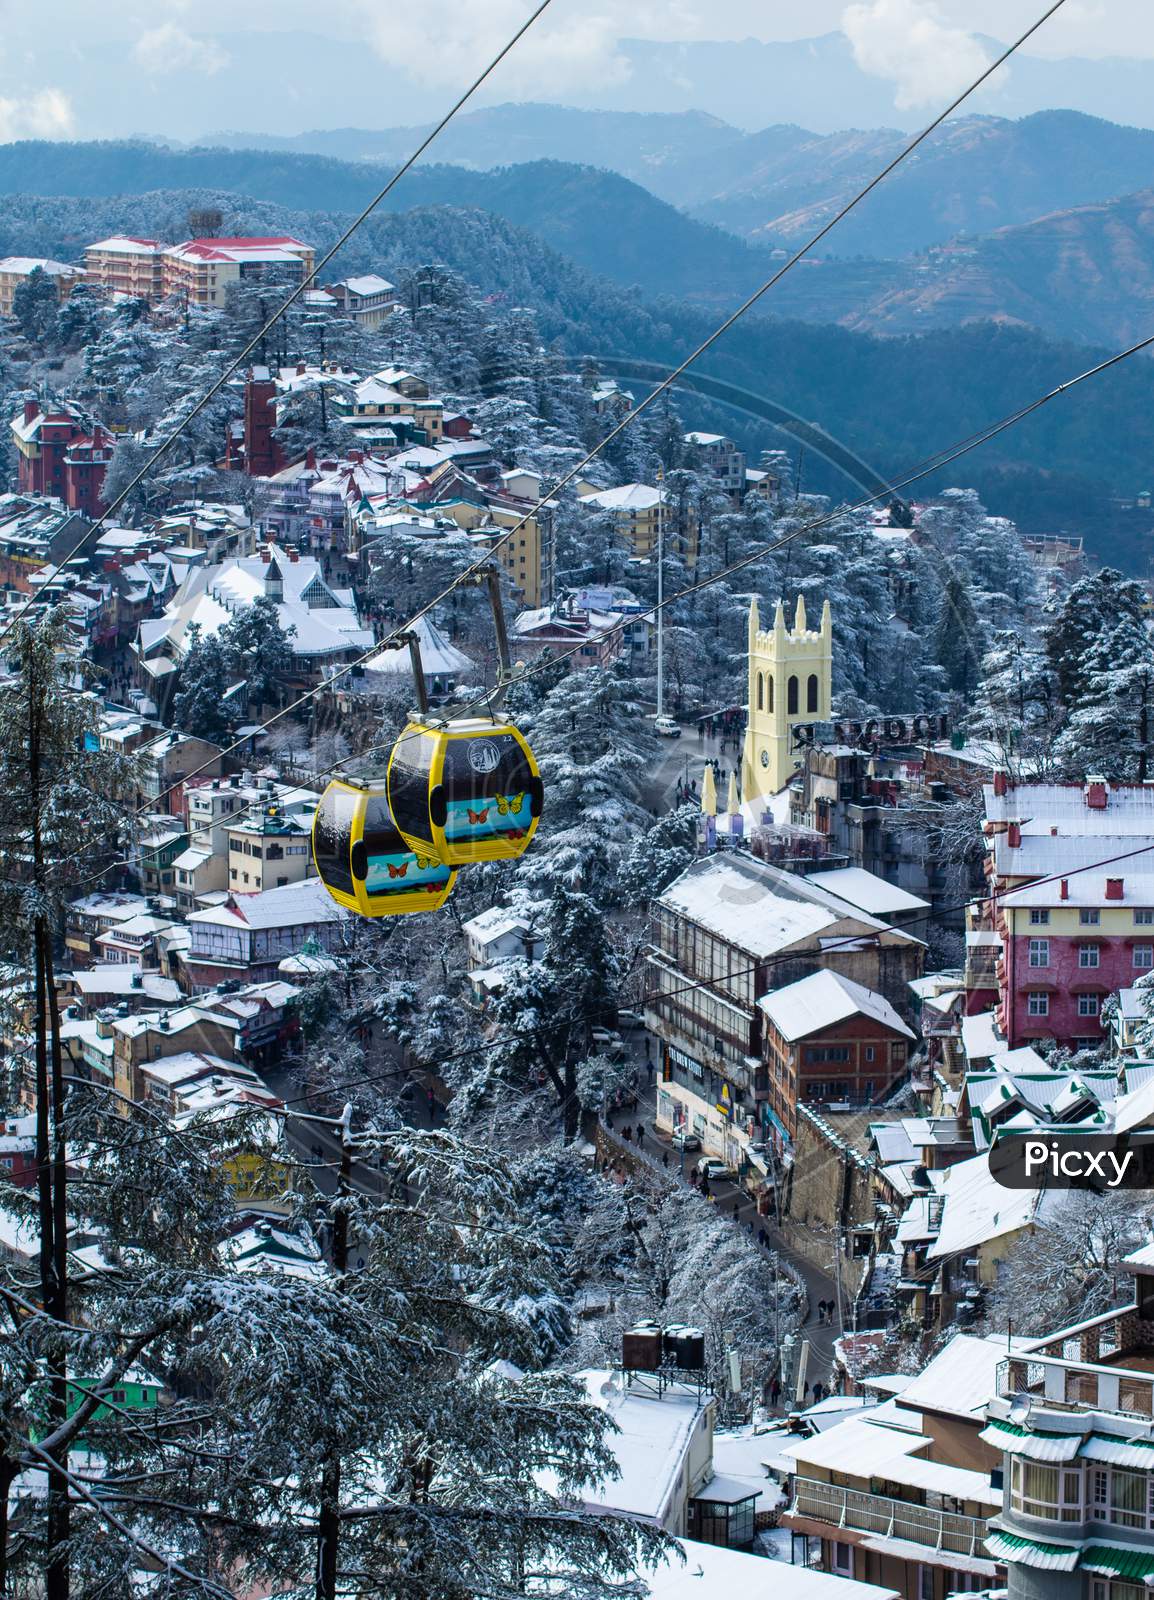 Cable car or ropeway in shimla during winters snowfall.